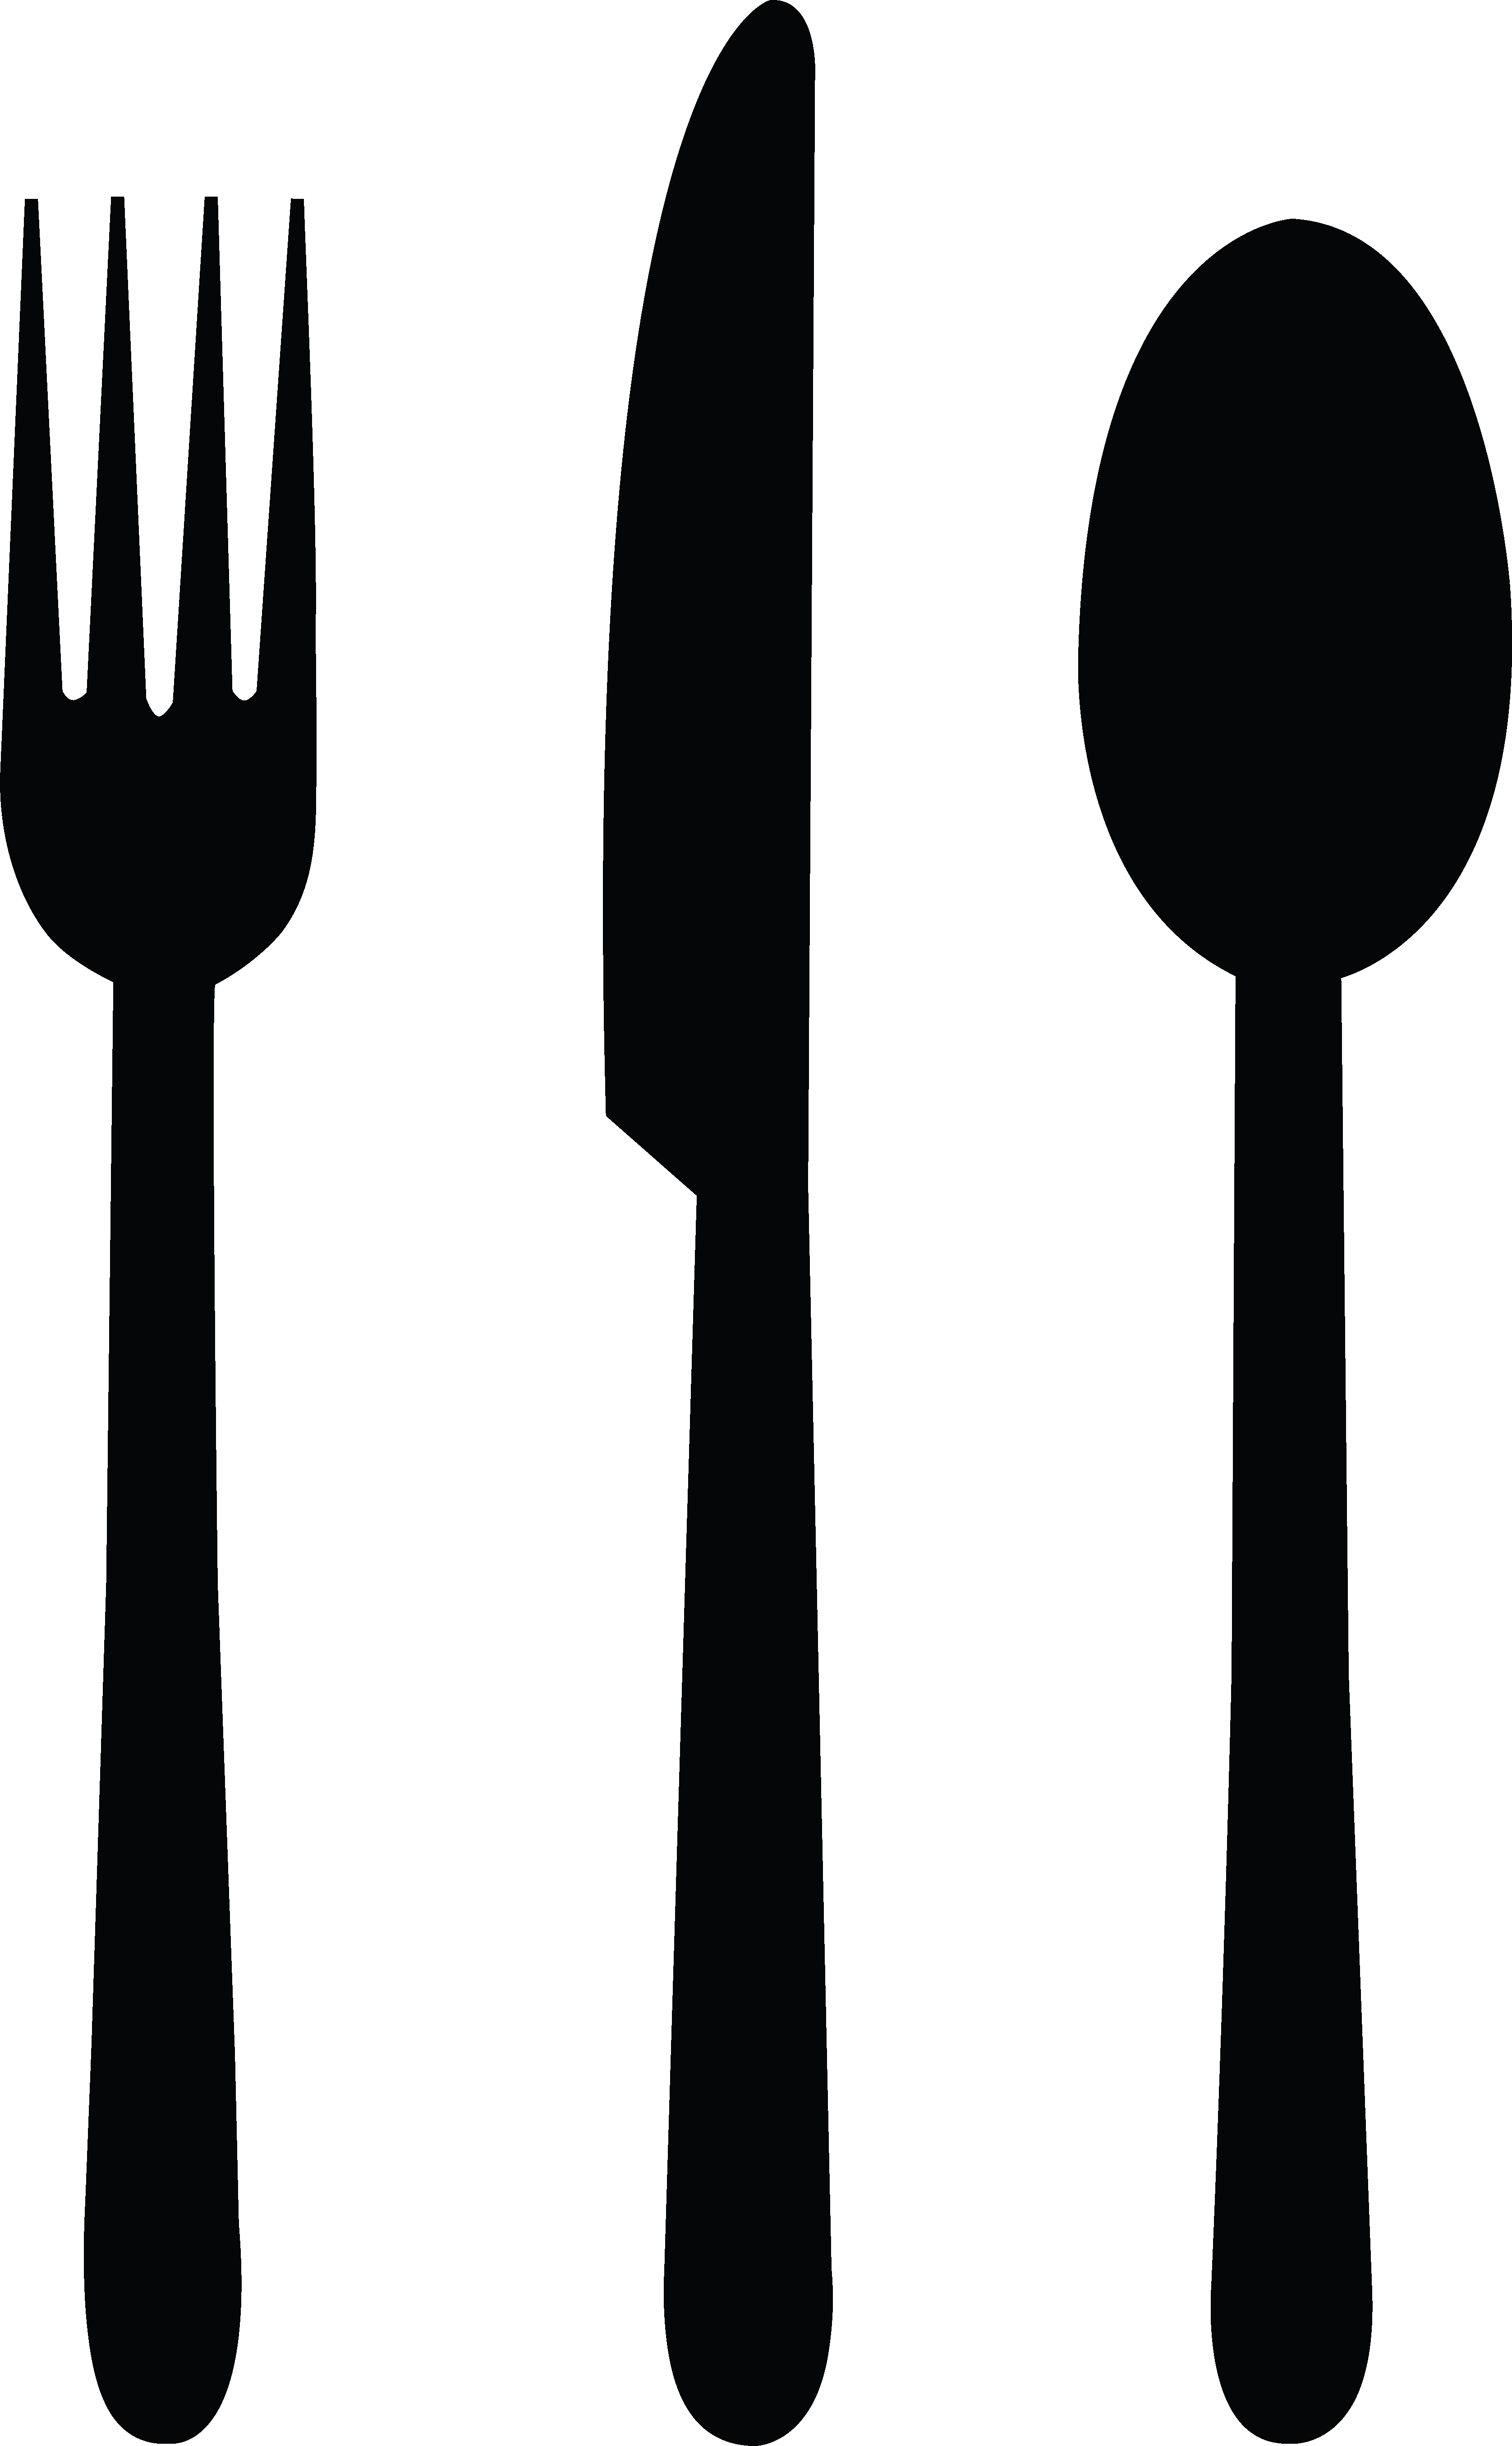 Knives And Forks Clip Art - ClipArt Best